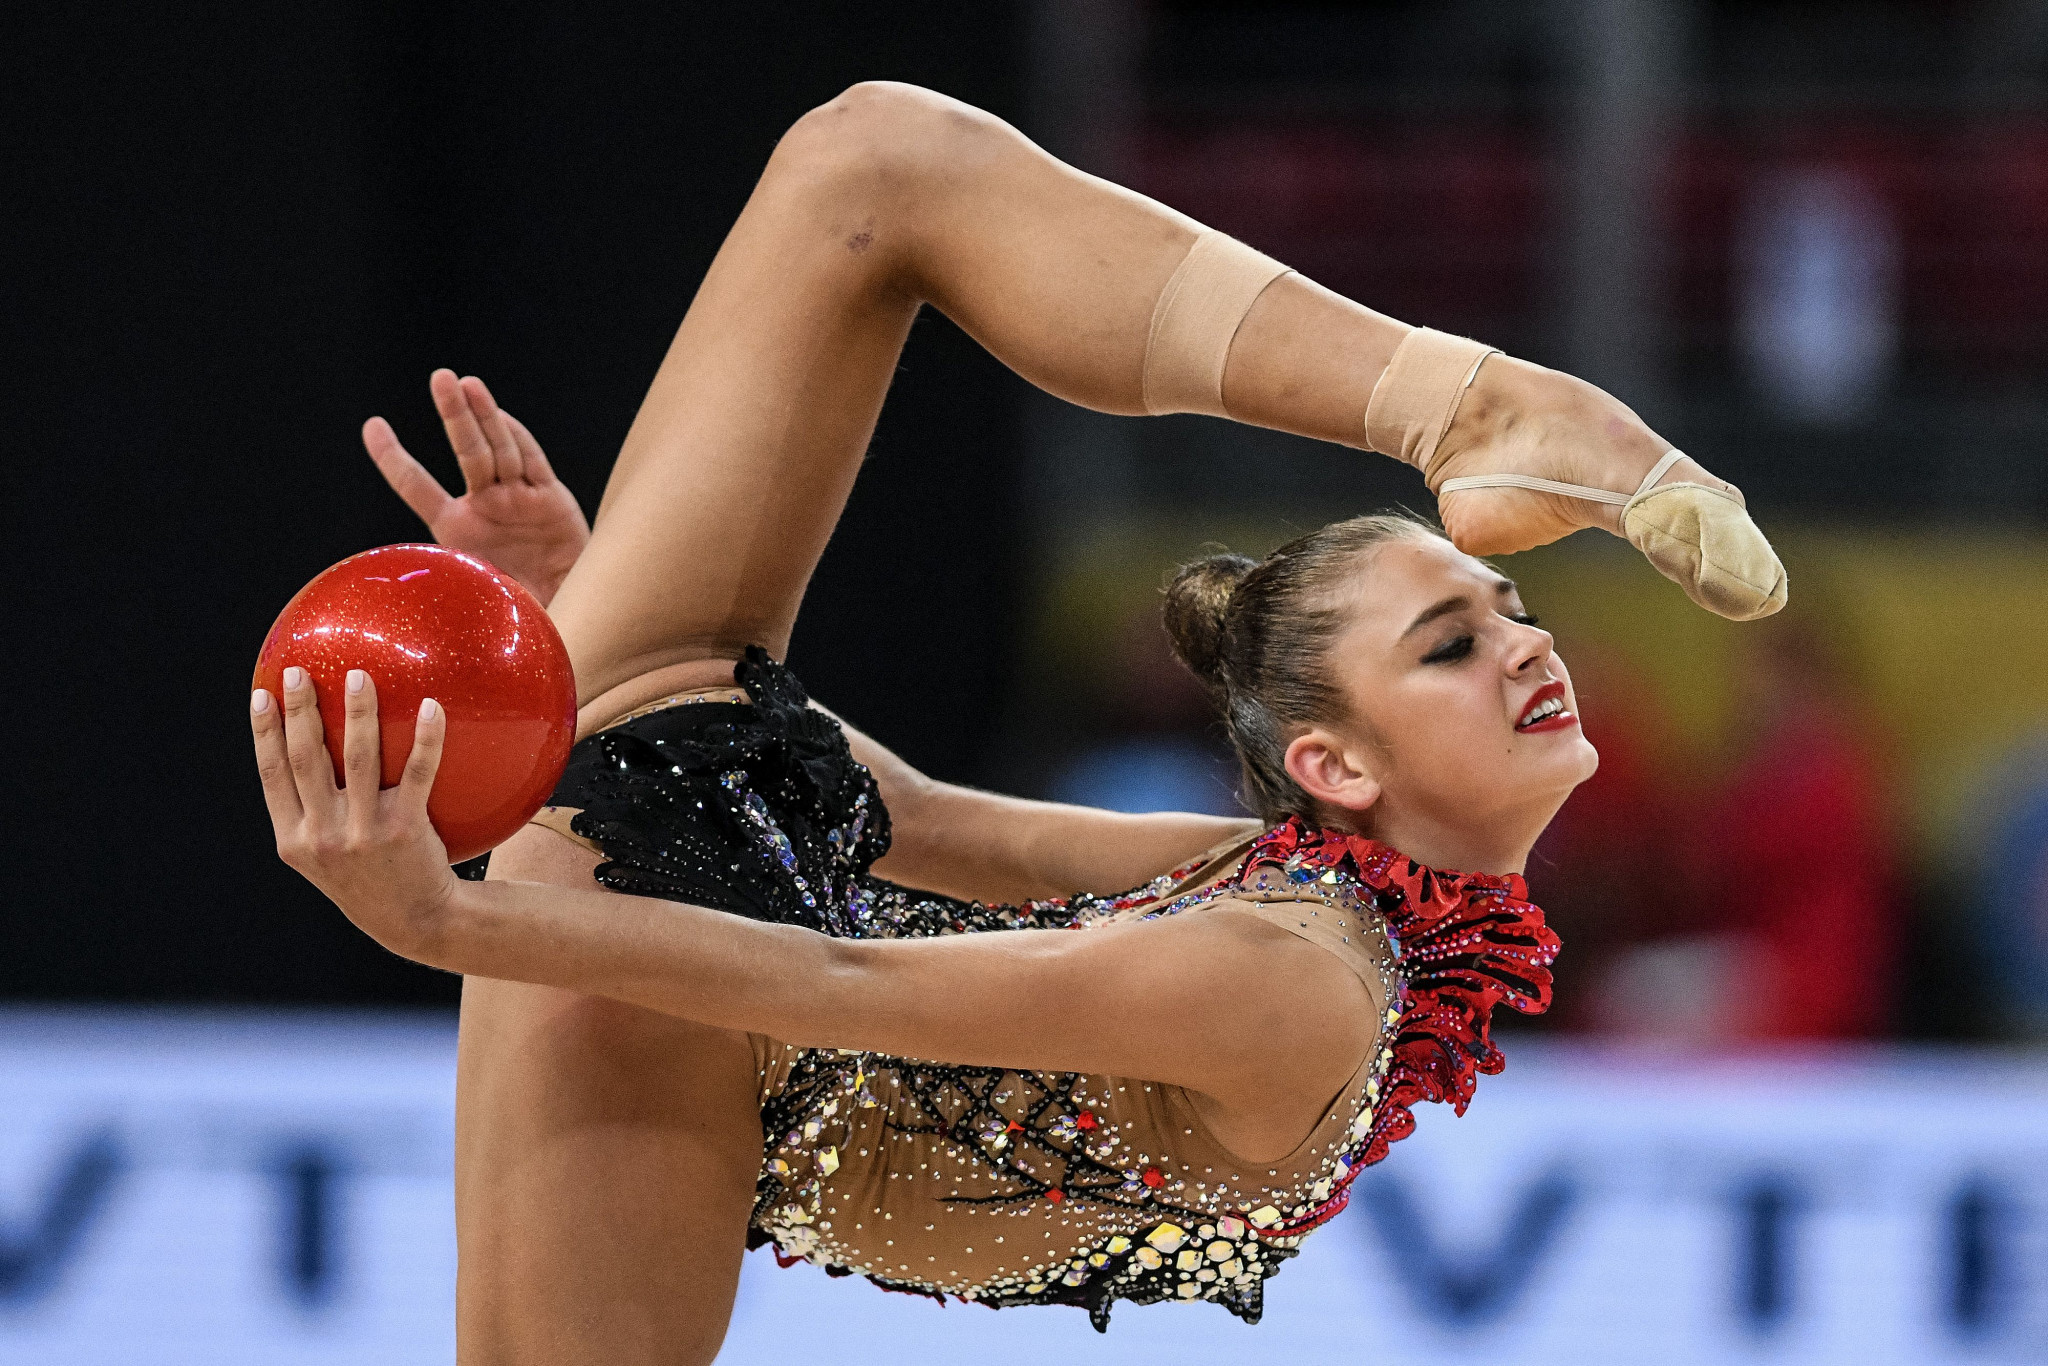 Russia’s Alexandra Soldatova followed up her victory in yesterday’s all-around competition by winning all four individual apparatus titles at the Rhythmic Gymnastics World Challenge Cup in Guadalajara in Spain ©Getty Images